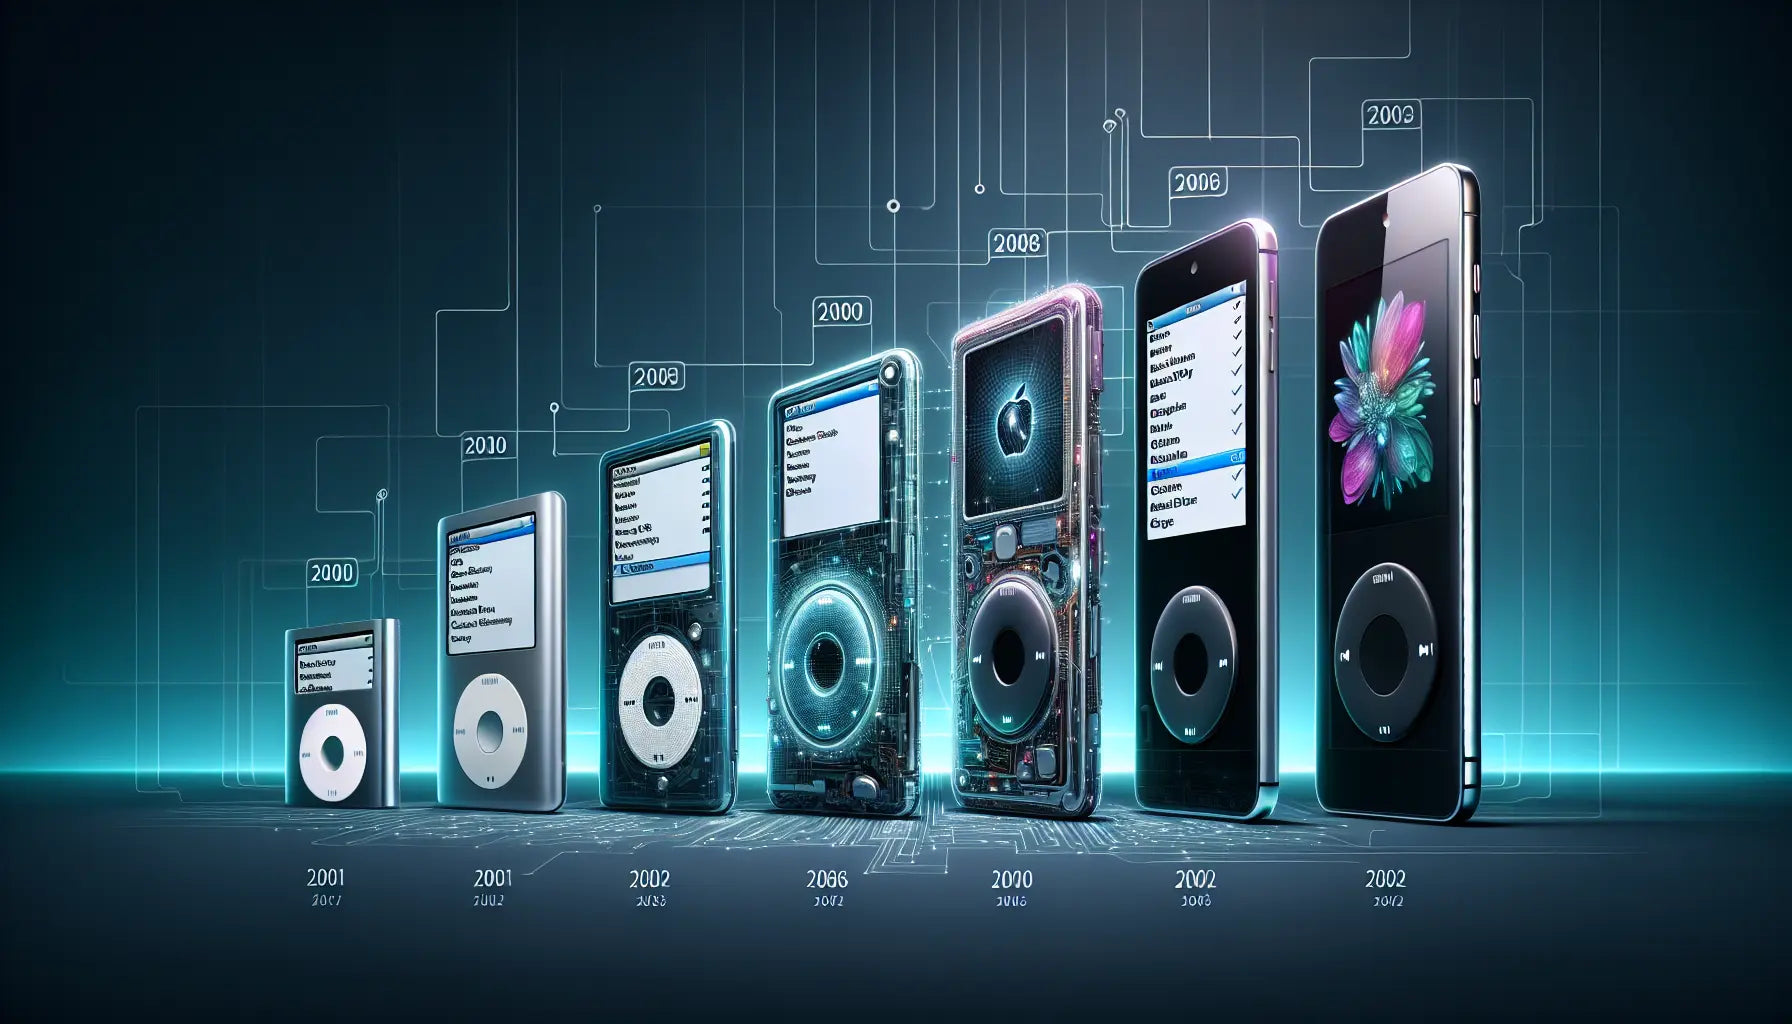 Evolution of the iPod